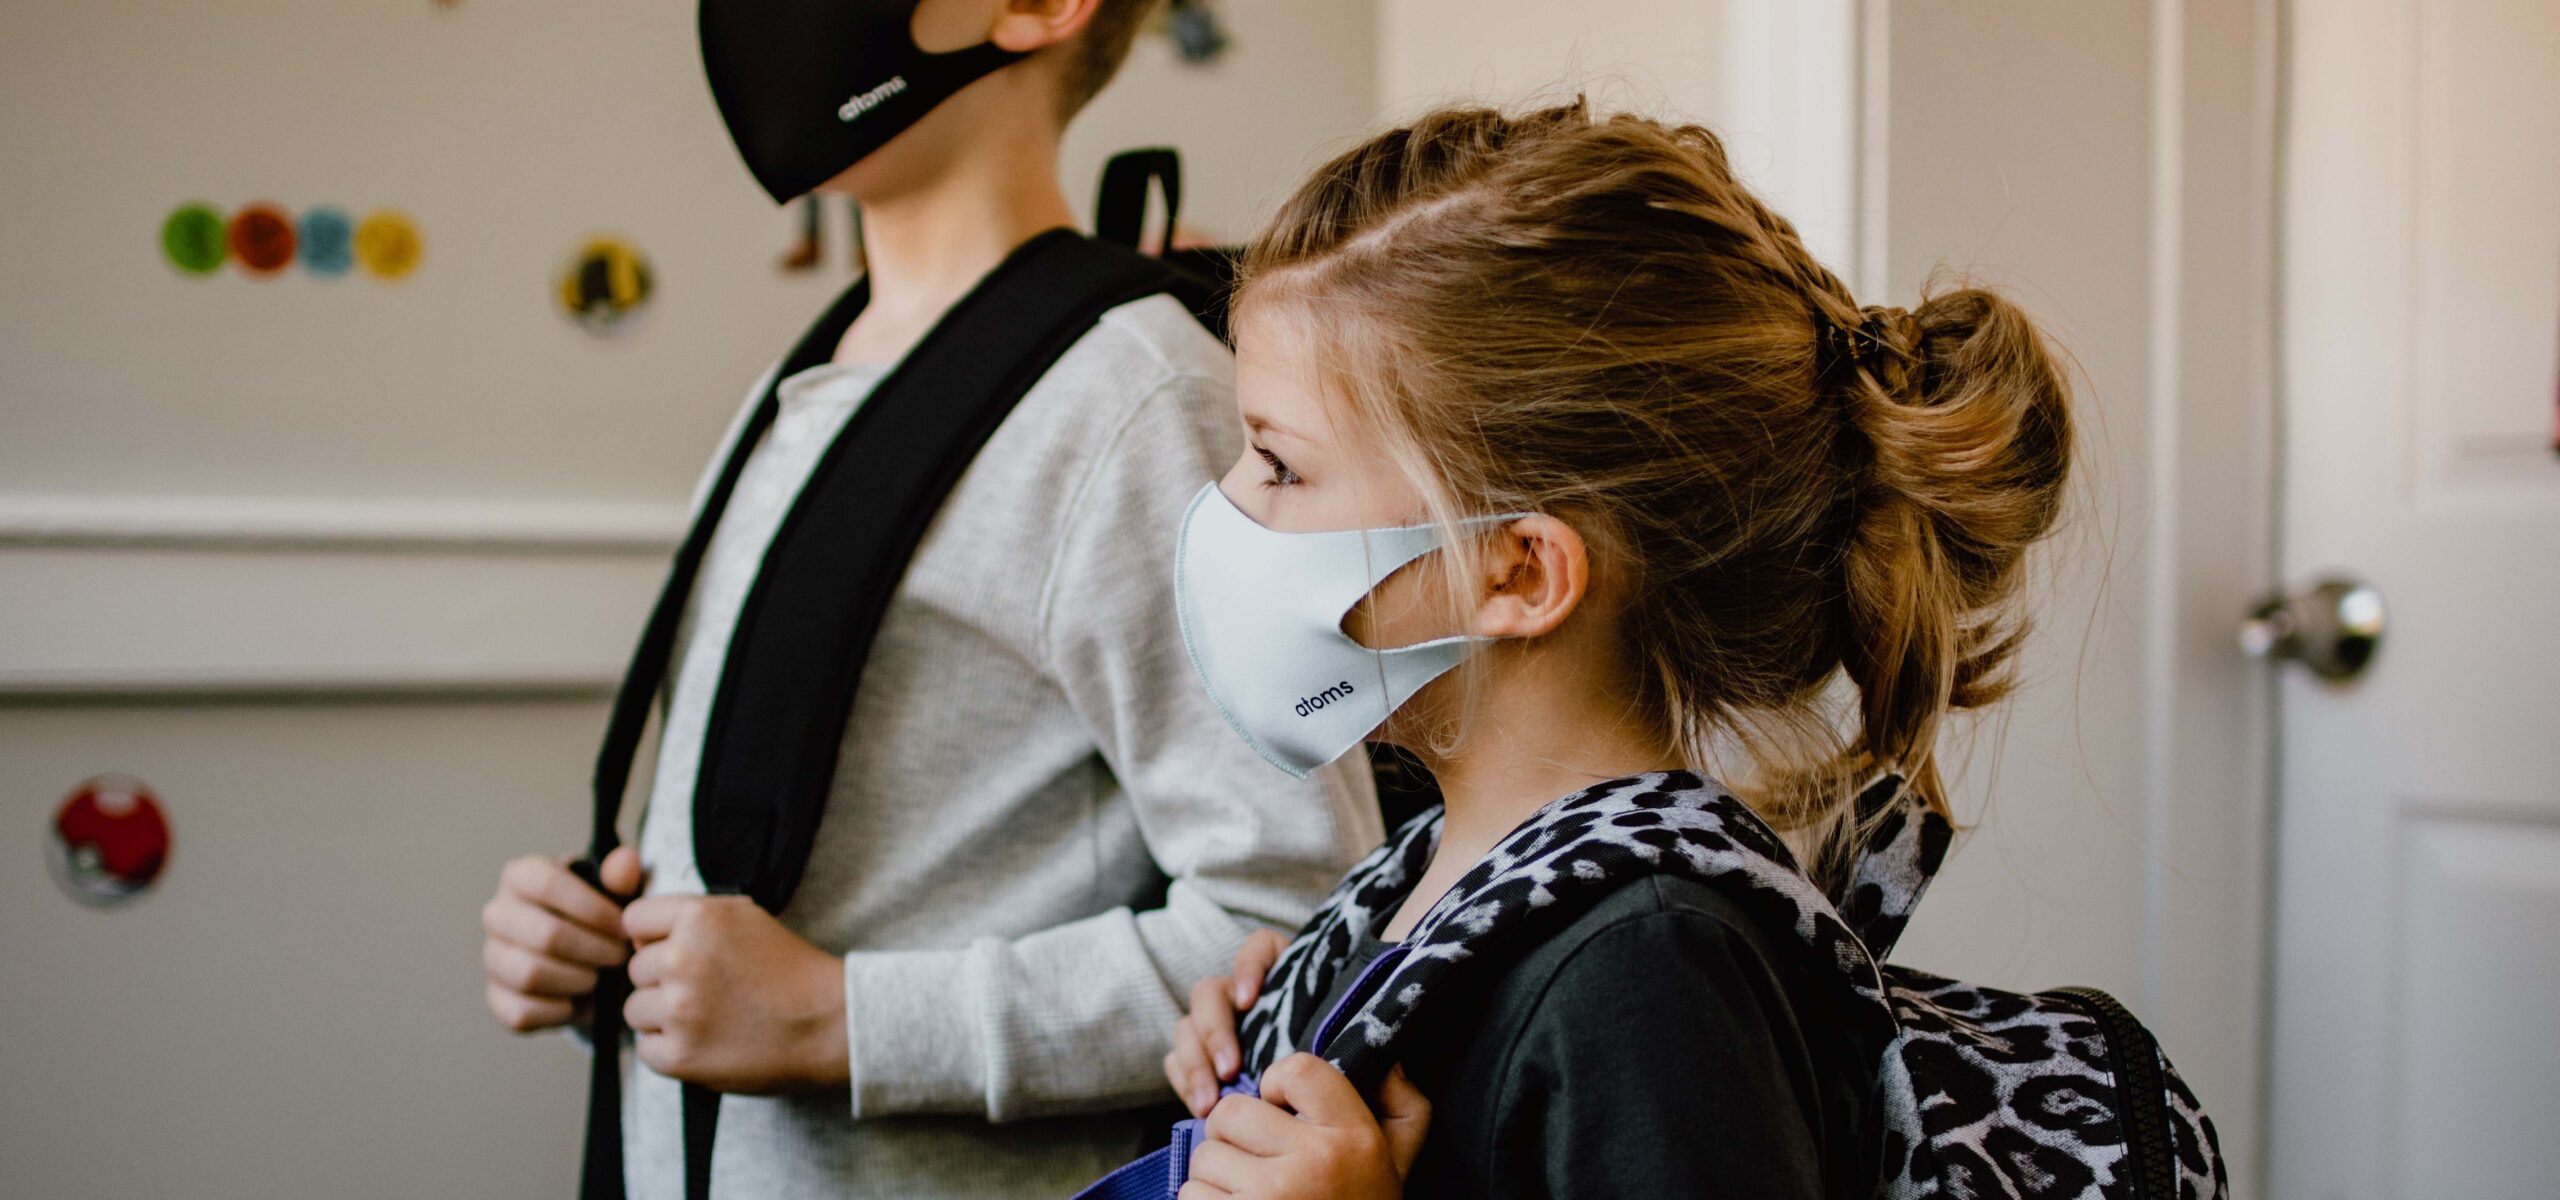 School-aged girl and boy with backpacks and masks on, appear ready to head off to school.